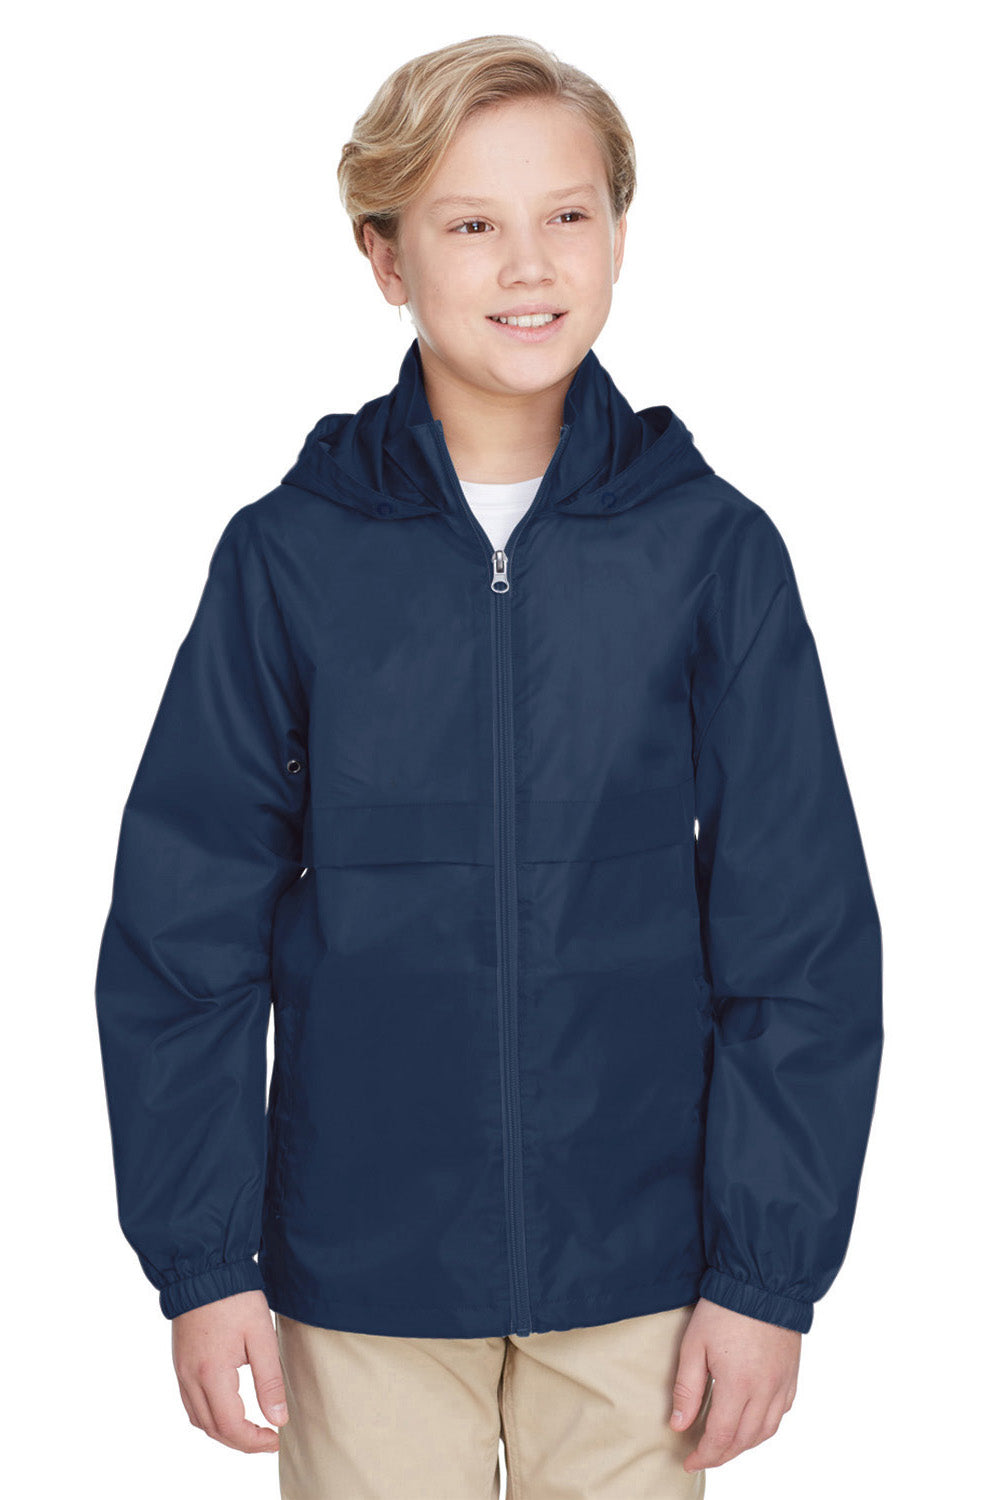 Team 365 TT73Y Youth Zone Protect Water Resistant Full Zip Hooded Jacket Navy Blue Front